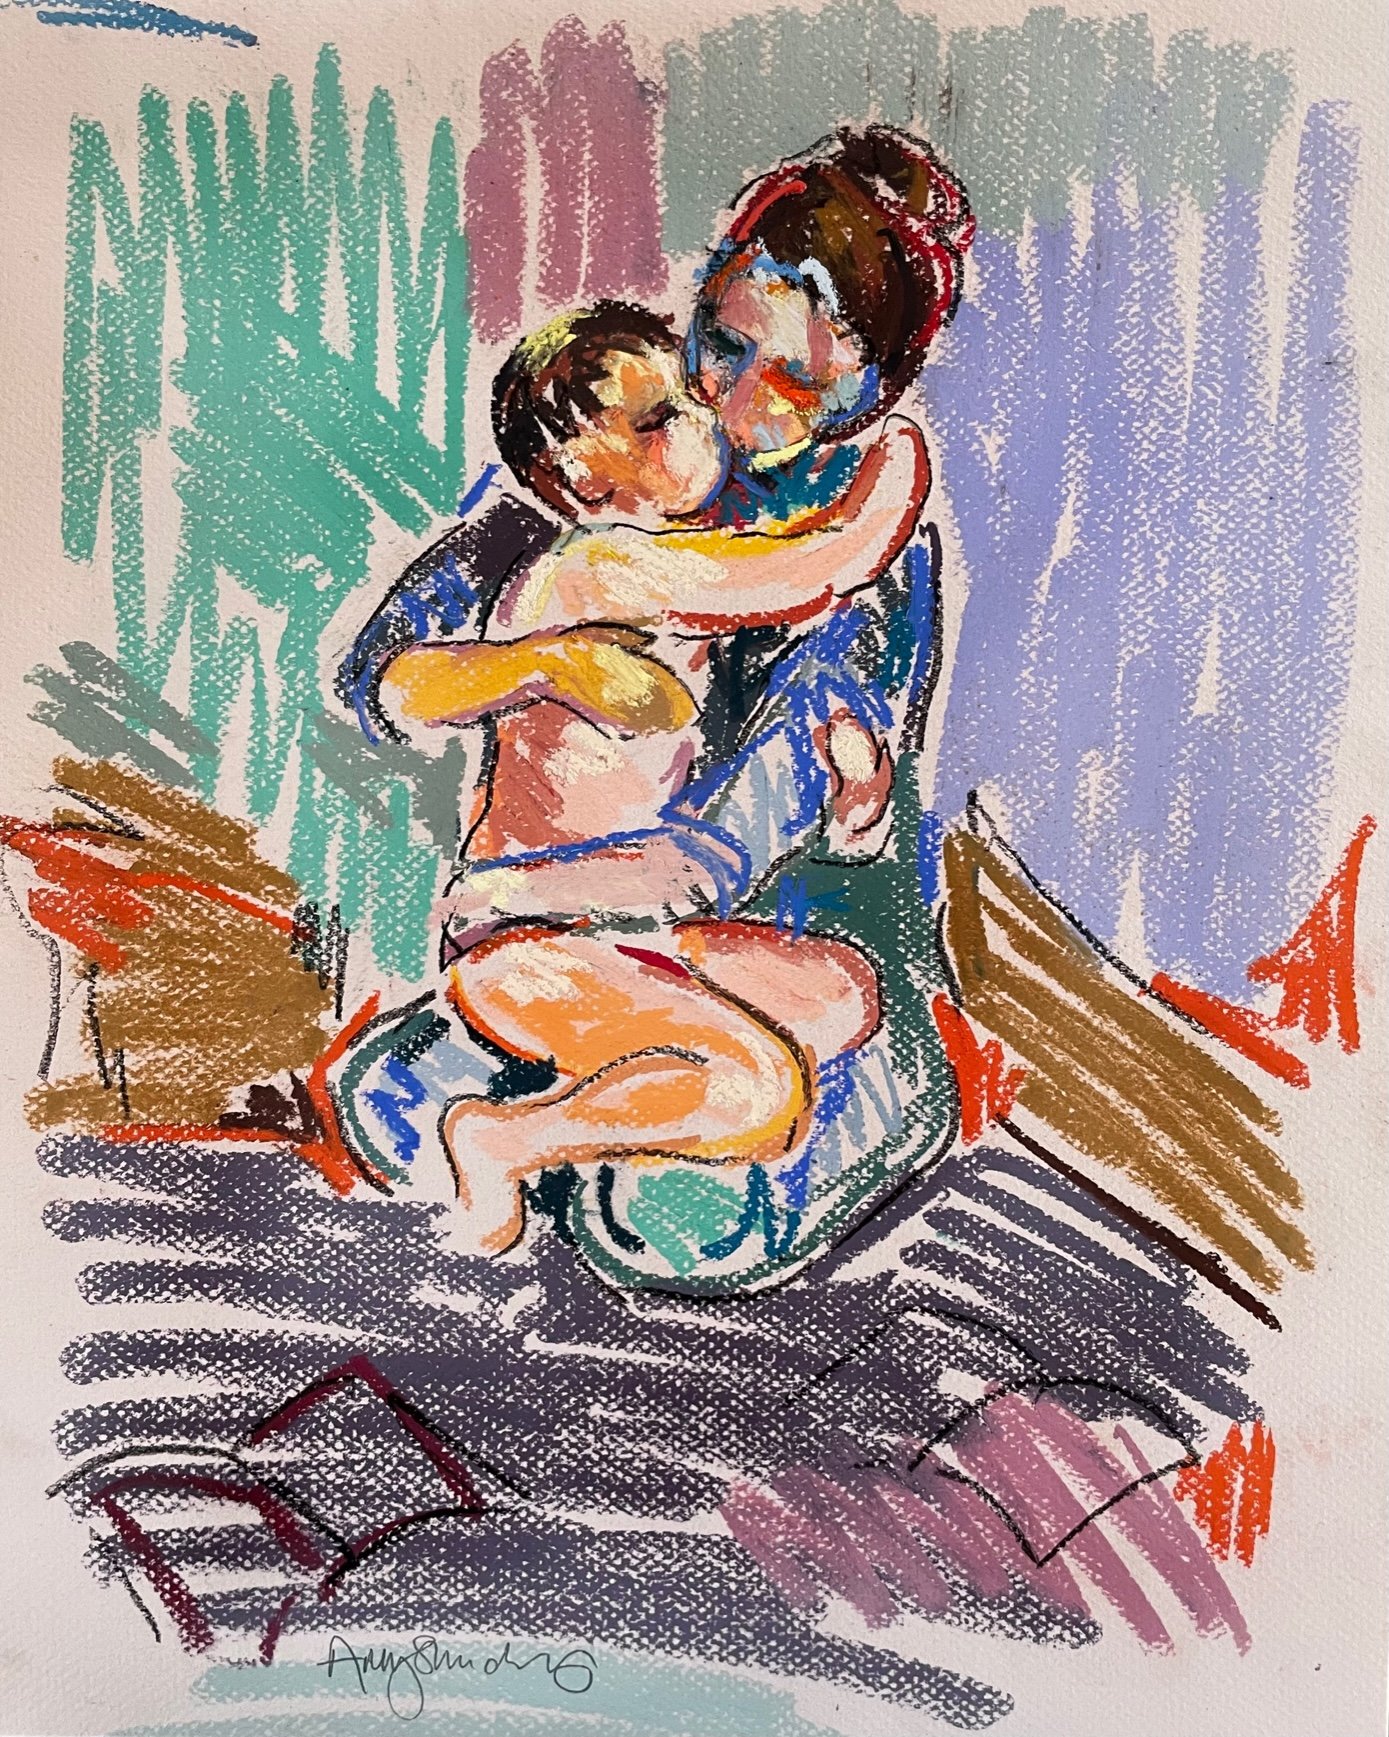 Mother and child, embrace, pastel on paper, 40x30cm, unframed, £350